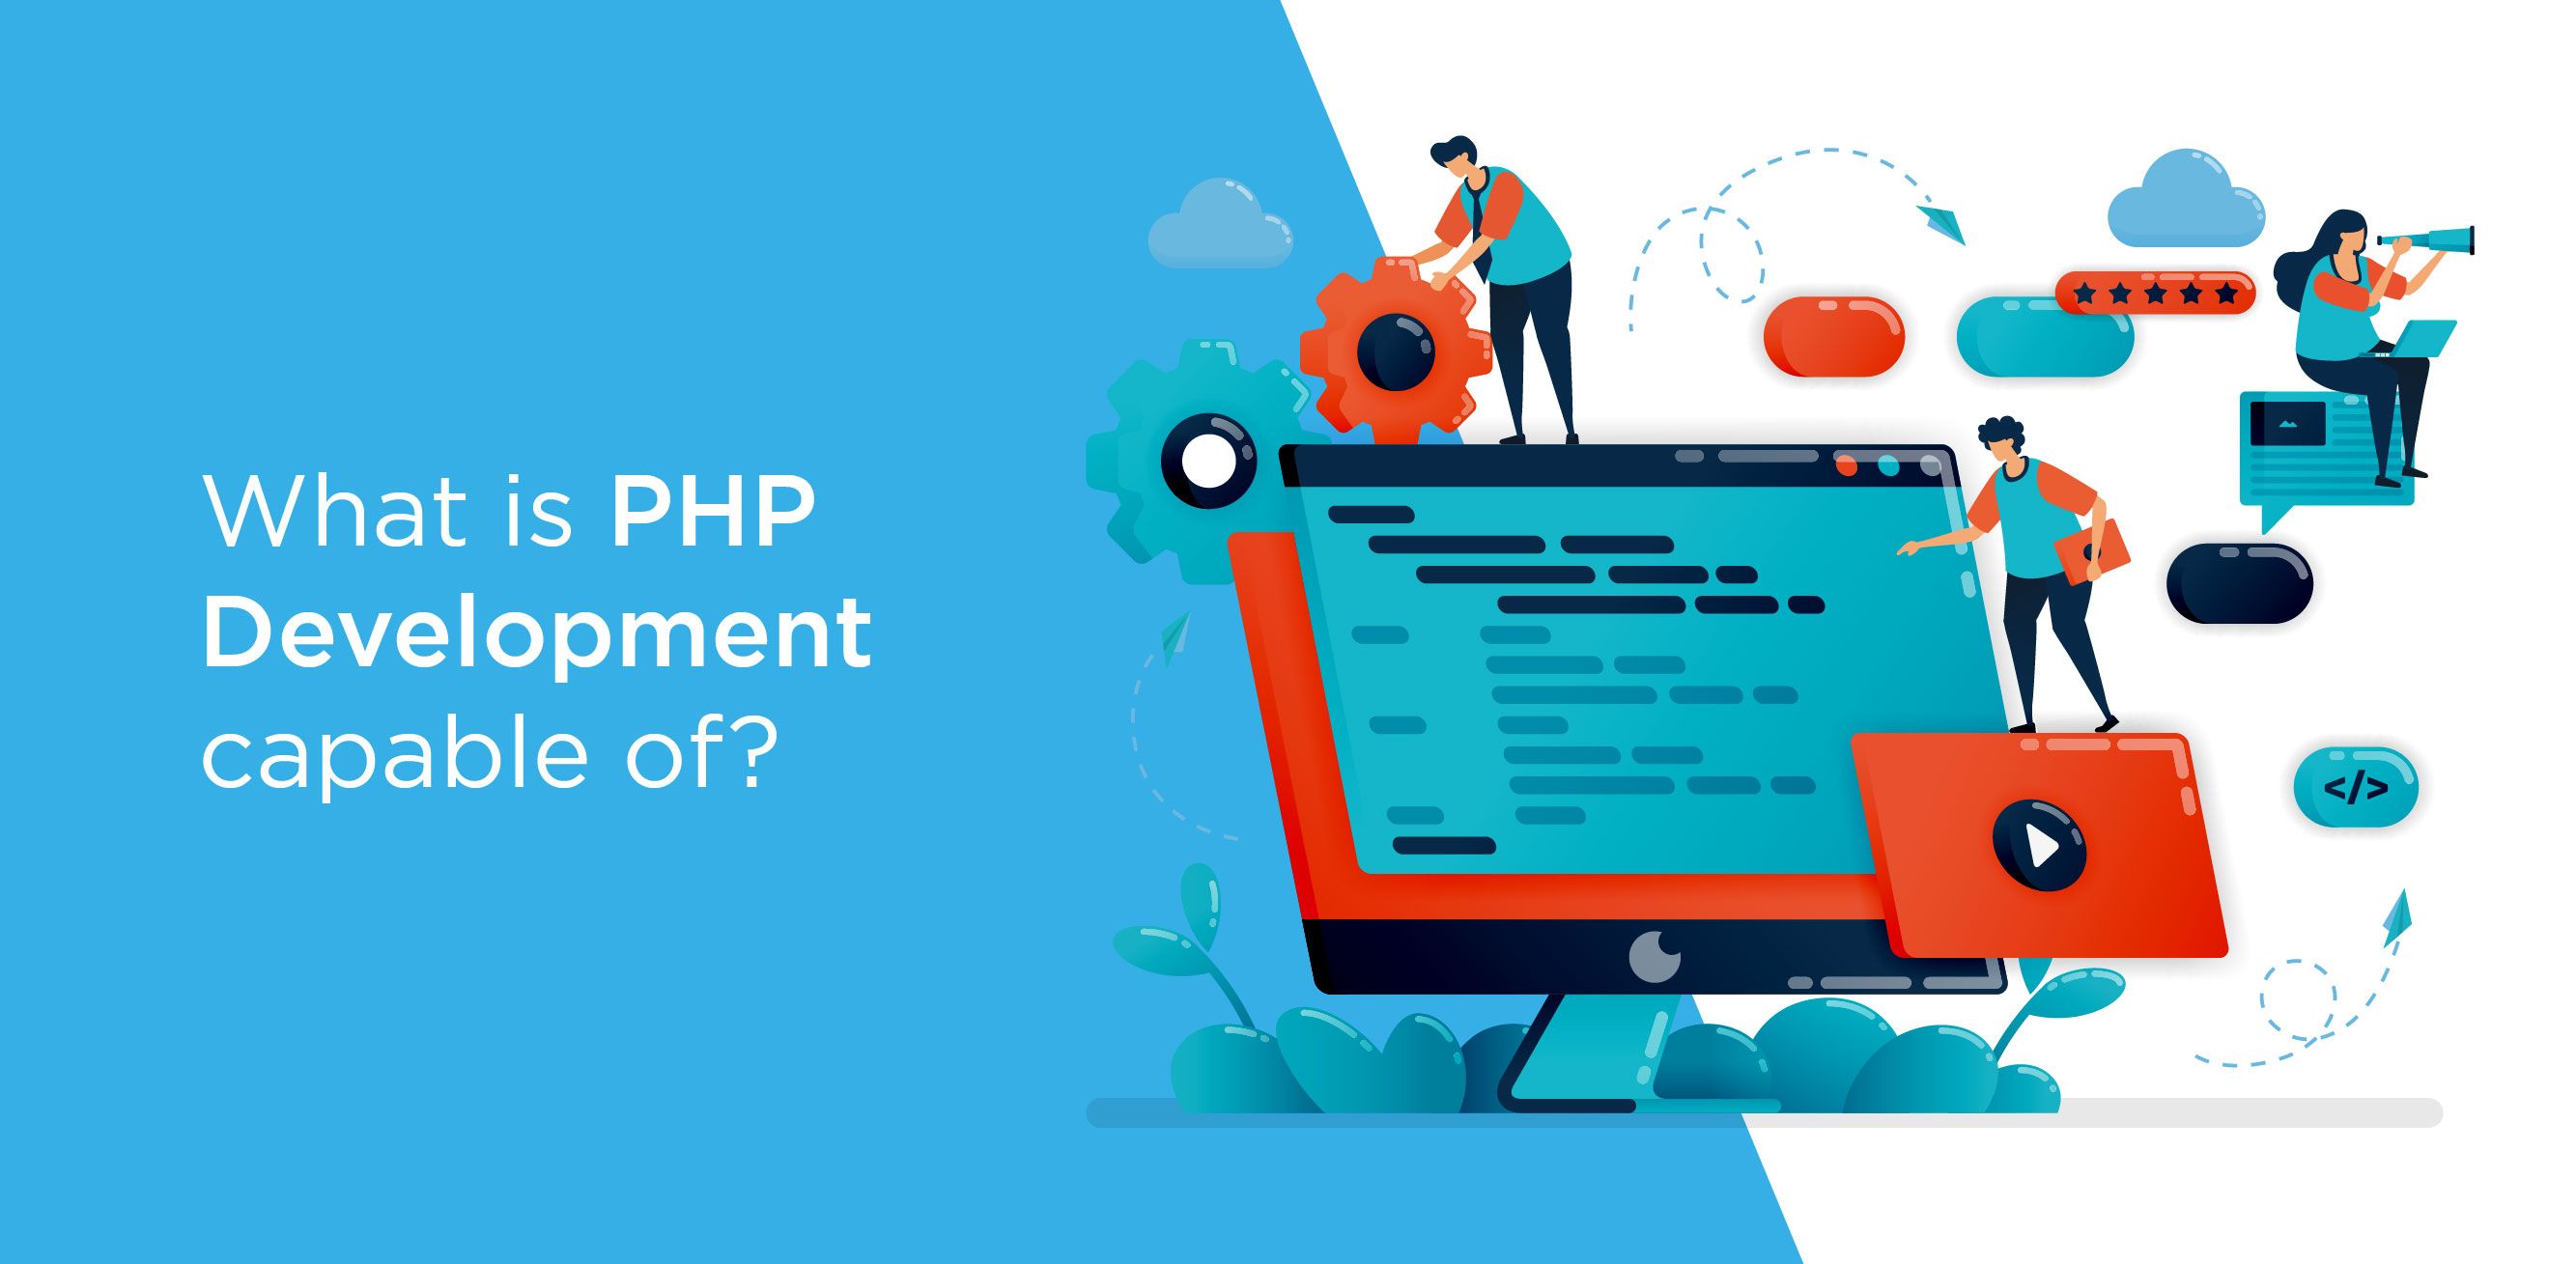 What is PHP Development capable of?